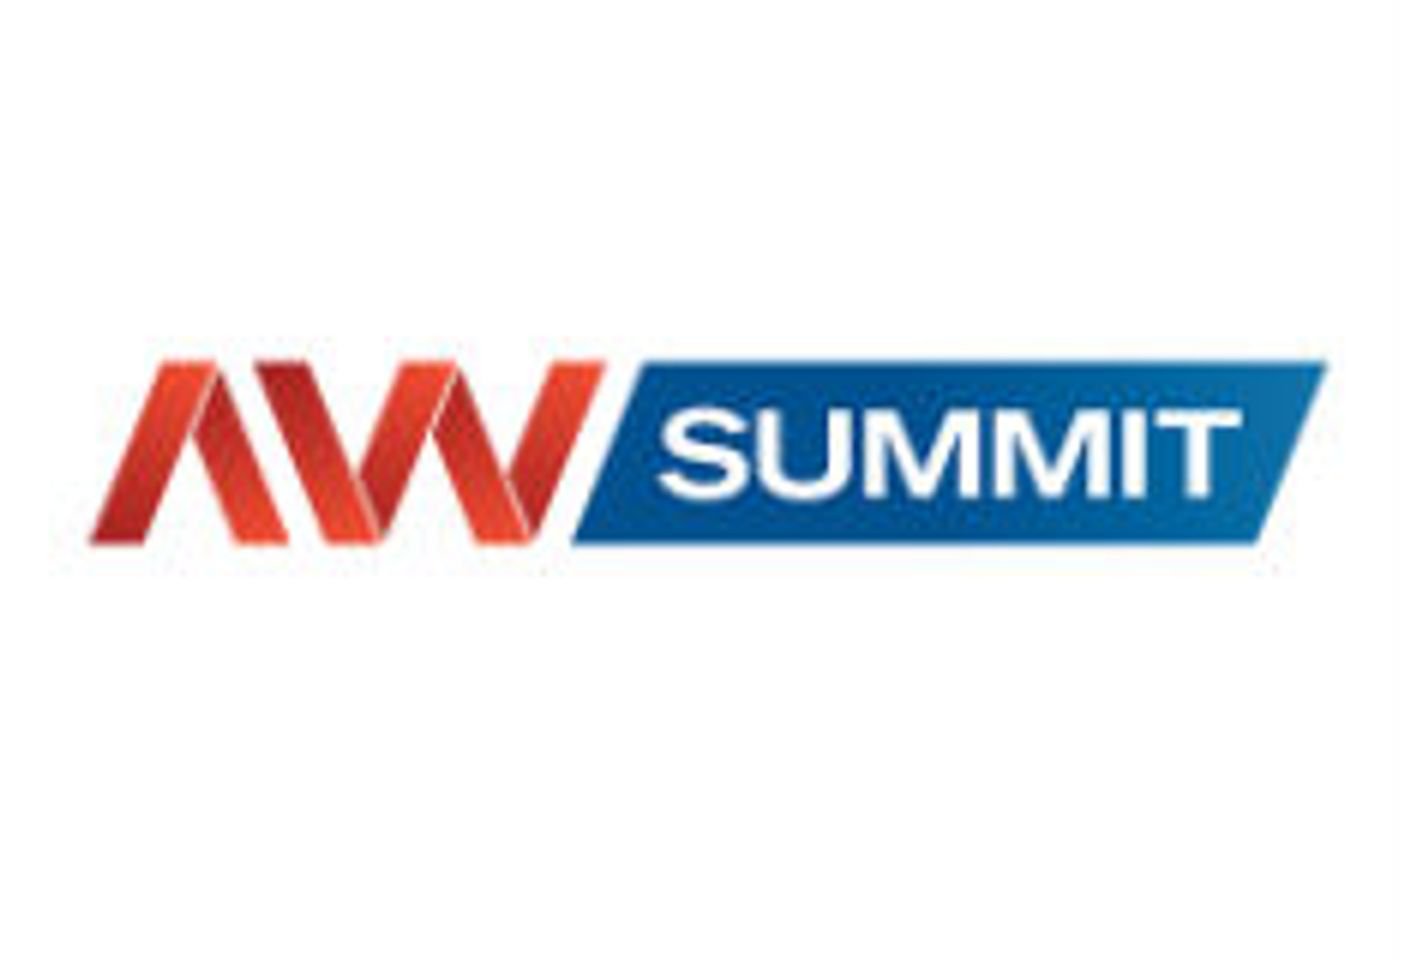 AWSummit Organizers Gearing Up For 2016 Show In June